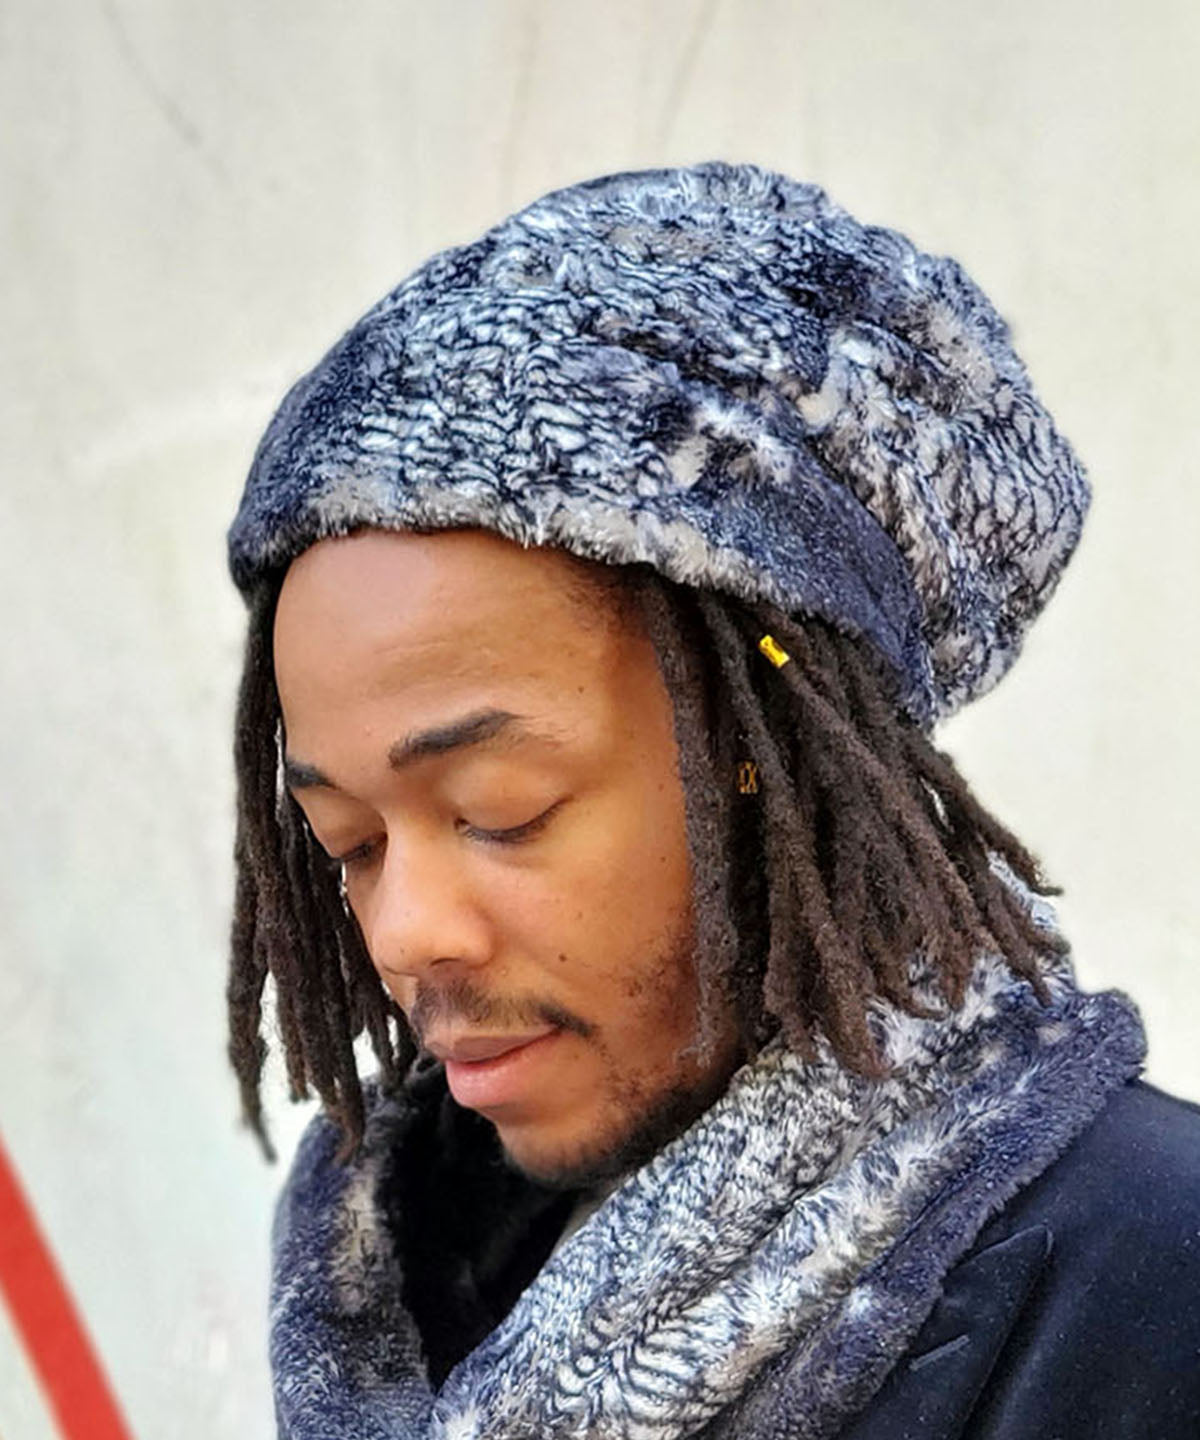 Man modeling a Men's Beanie Hat and matching Neck warmer| Black Mamba Faux Fur | Handmade in the USA by Pandemonium Seattle